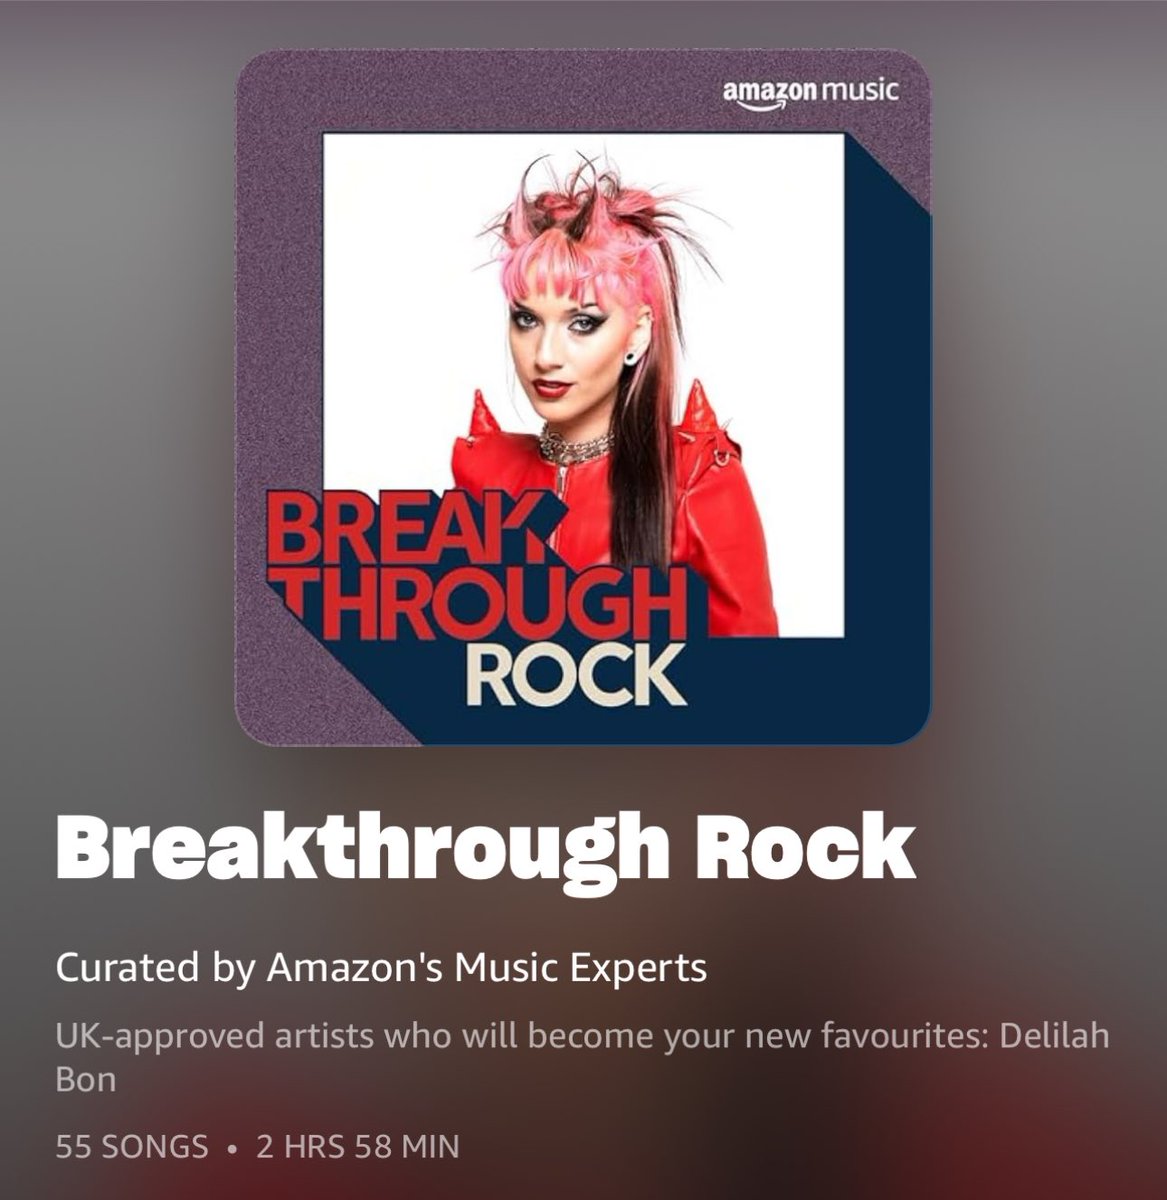 📣🖤 @AmazonMusicUK 🖤📣 📣🖤 C O F I Λ ‘ R E N W 🖤📣 🖤 SO MUCH LOVE TO @AmazonMusicUK FOR INCLUDING OUR NU-SONG ON THEIR SICK 'BREΛKTHROUGH ROCK' EDITORIΛL PLΛYLIST WITH @Bambiethug, @wearelowlives, @calvalouise + @hailharpy! 🖤 🏴󠁧󠁢󠁷󠁬󠁳󠁿🖤 DIOLCH! 🖤🏴󠁧󠁢󠁷󠁬󠁳󠁿 ➡️ amzn.to/3UtXCTq